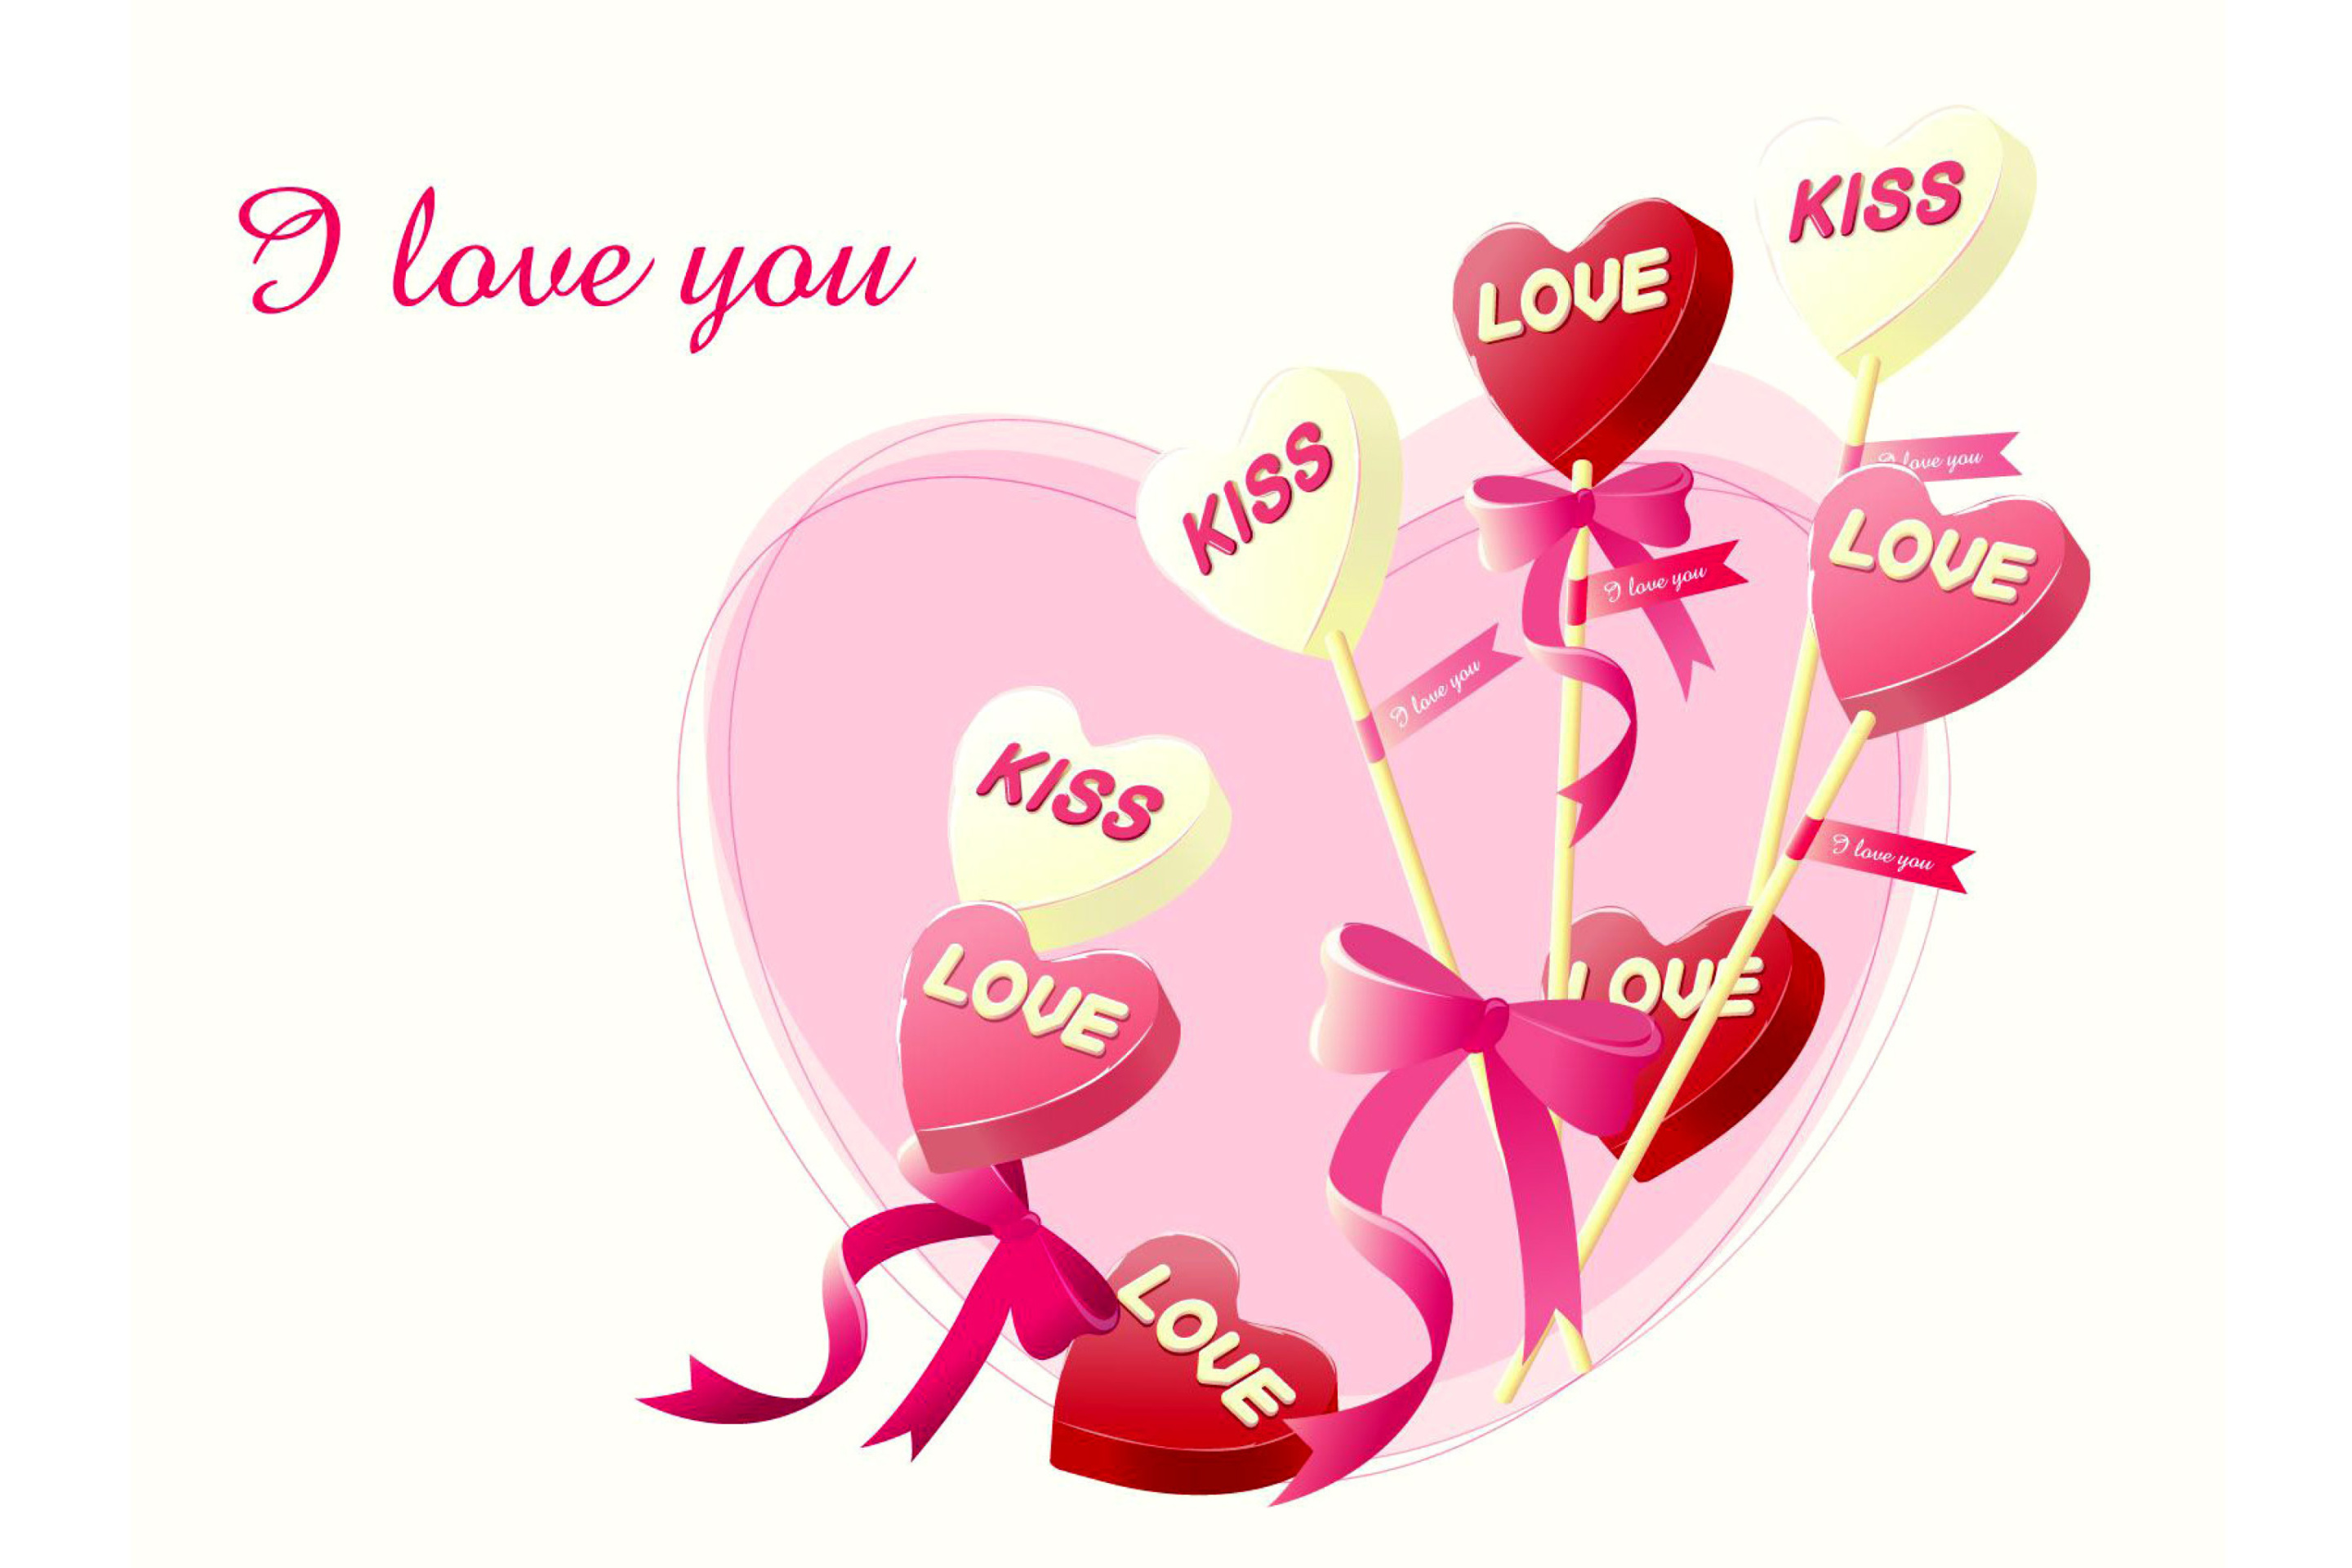 I Love You Balloons and Hearts wallpaper 2880x1920